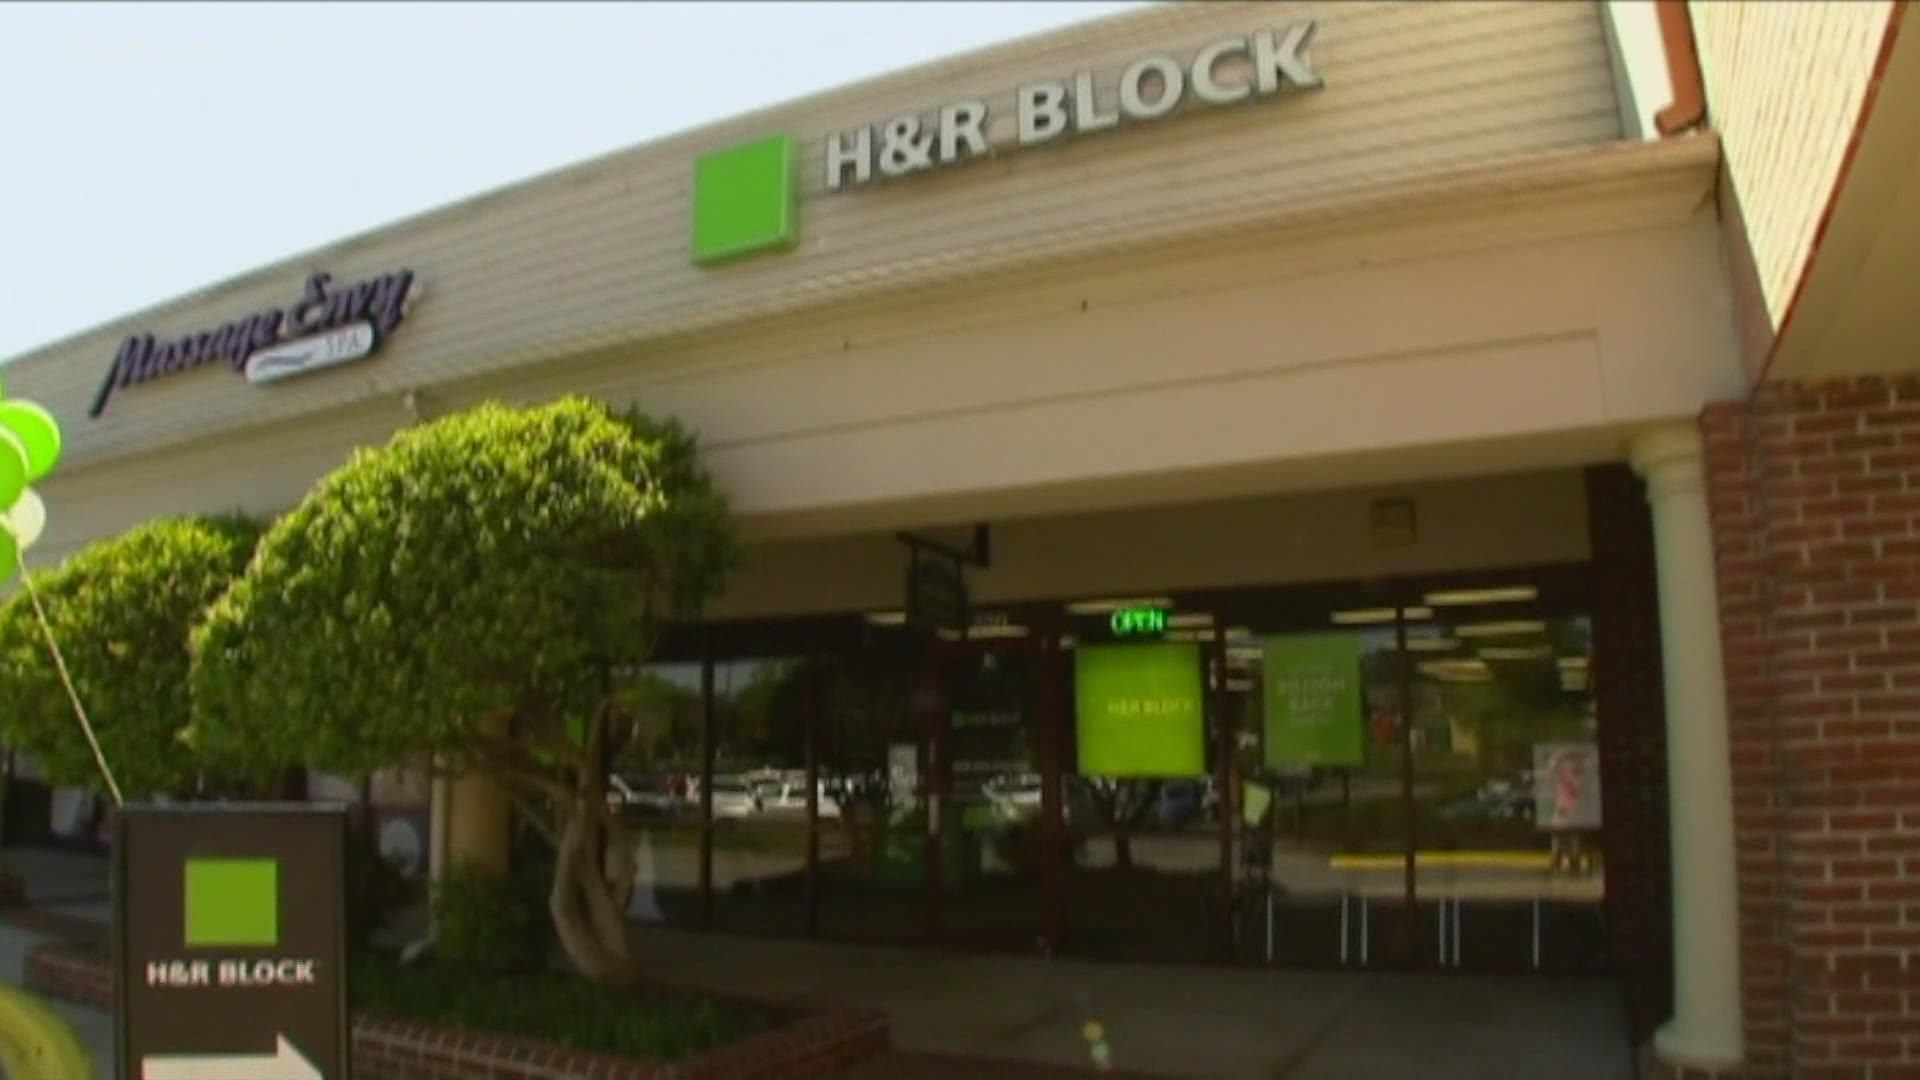 H&R Block said if they have service agents ready to speak to anyone who is affected.